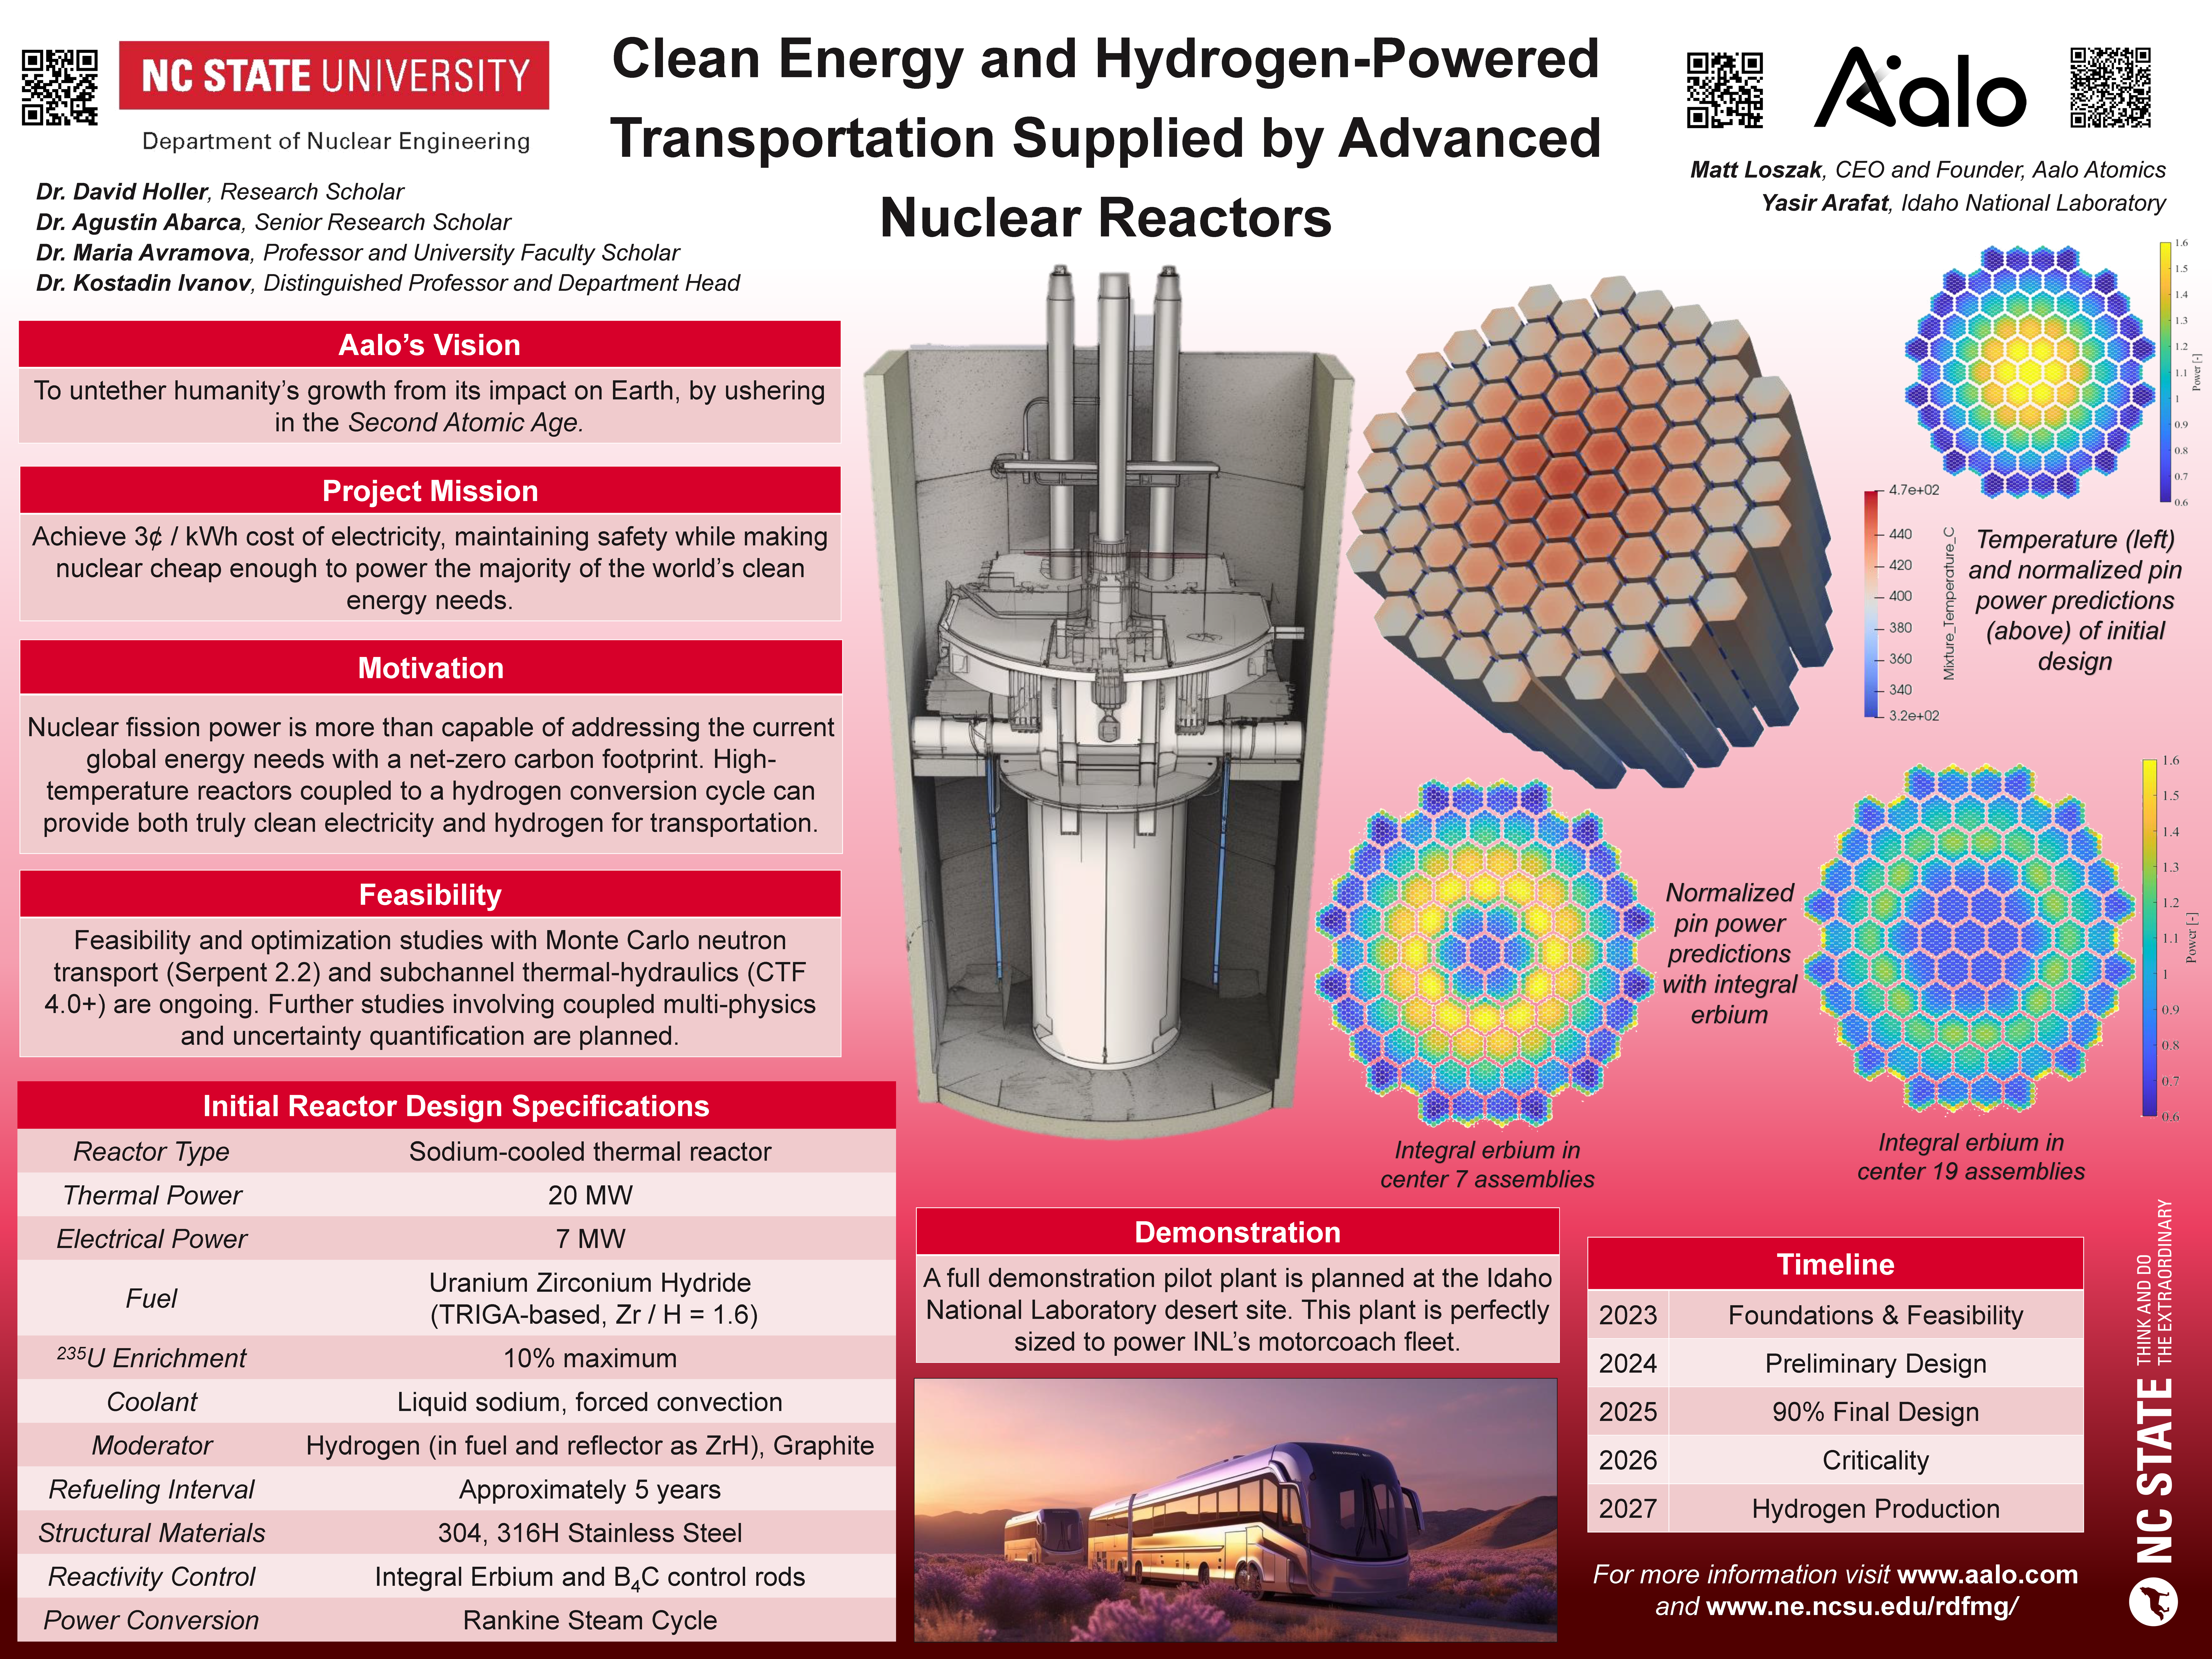 image of David Holler's poster, "Clean Energy and Hydrogen-Powered Transportation Supplied by Advanced Nuclear Reactors"